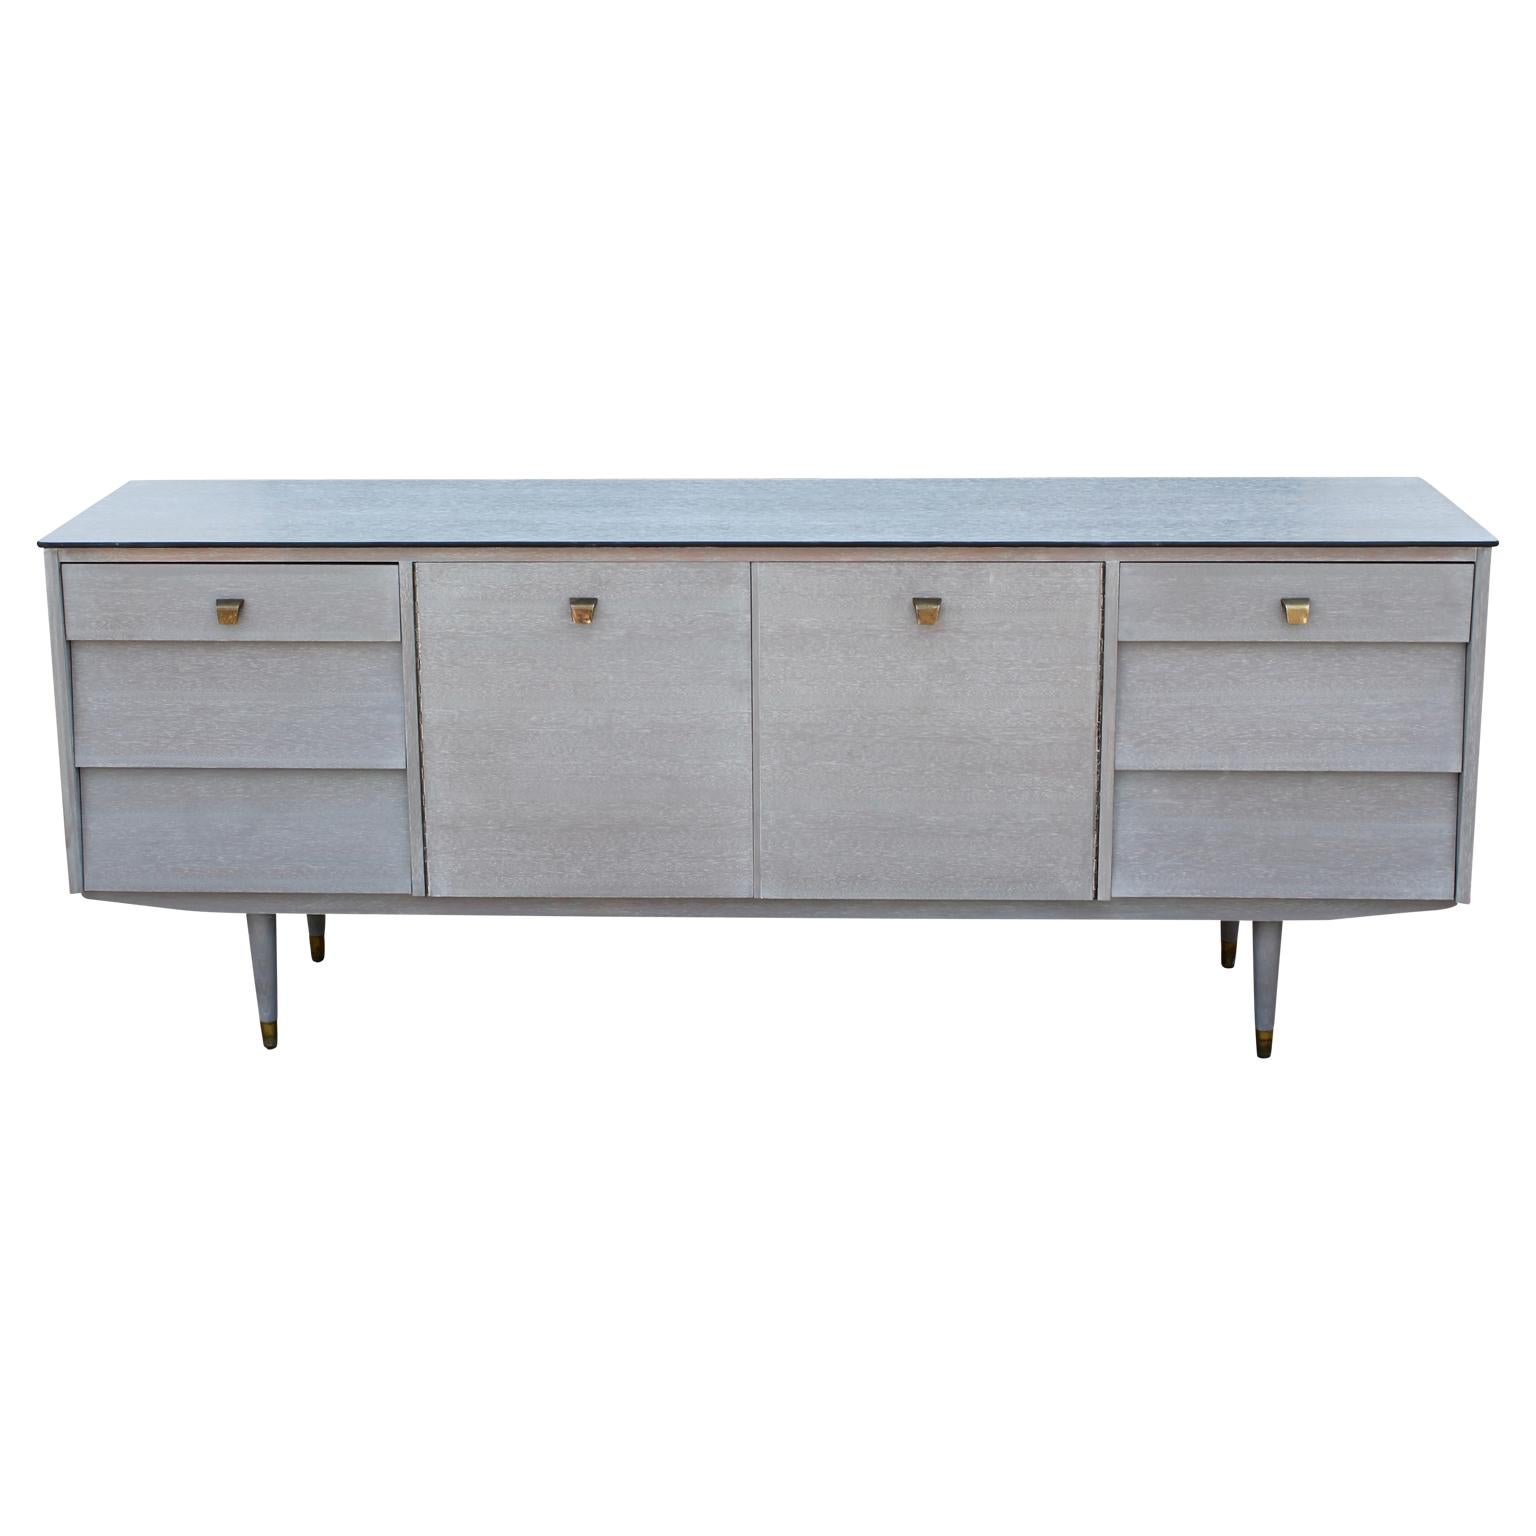 Wonderful modern custom sideboard or credenza. It has a newly cerused finish and brass handles. This credenza has six drawers and two cabinet doors with one interior shelf.